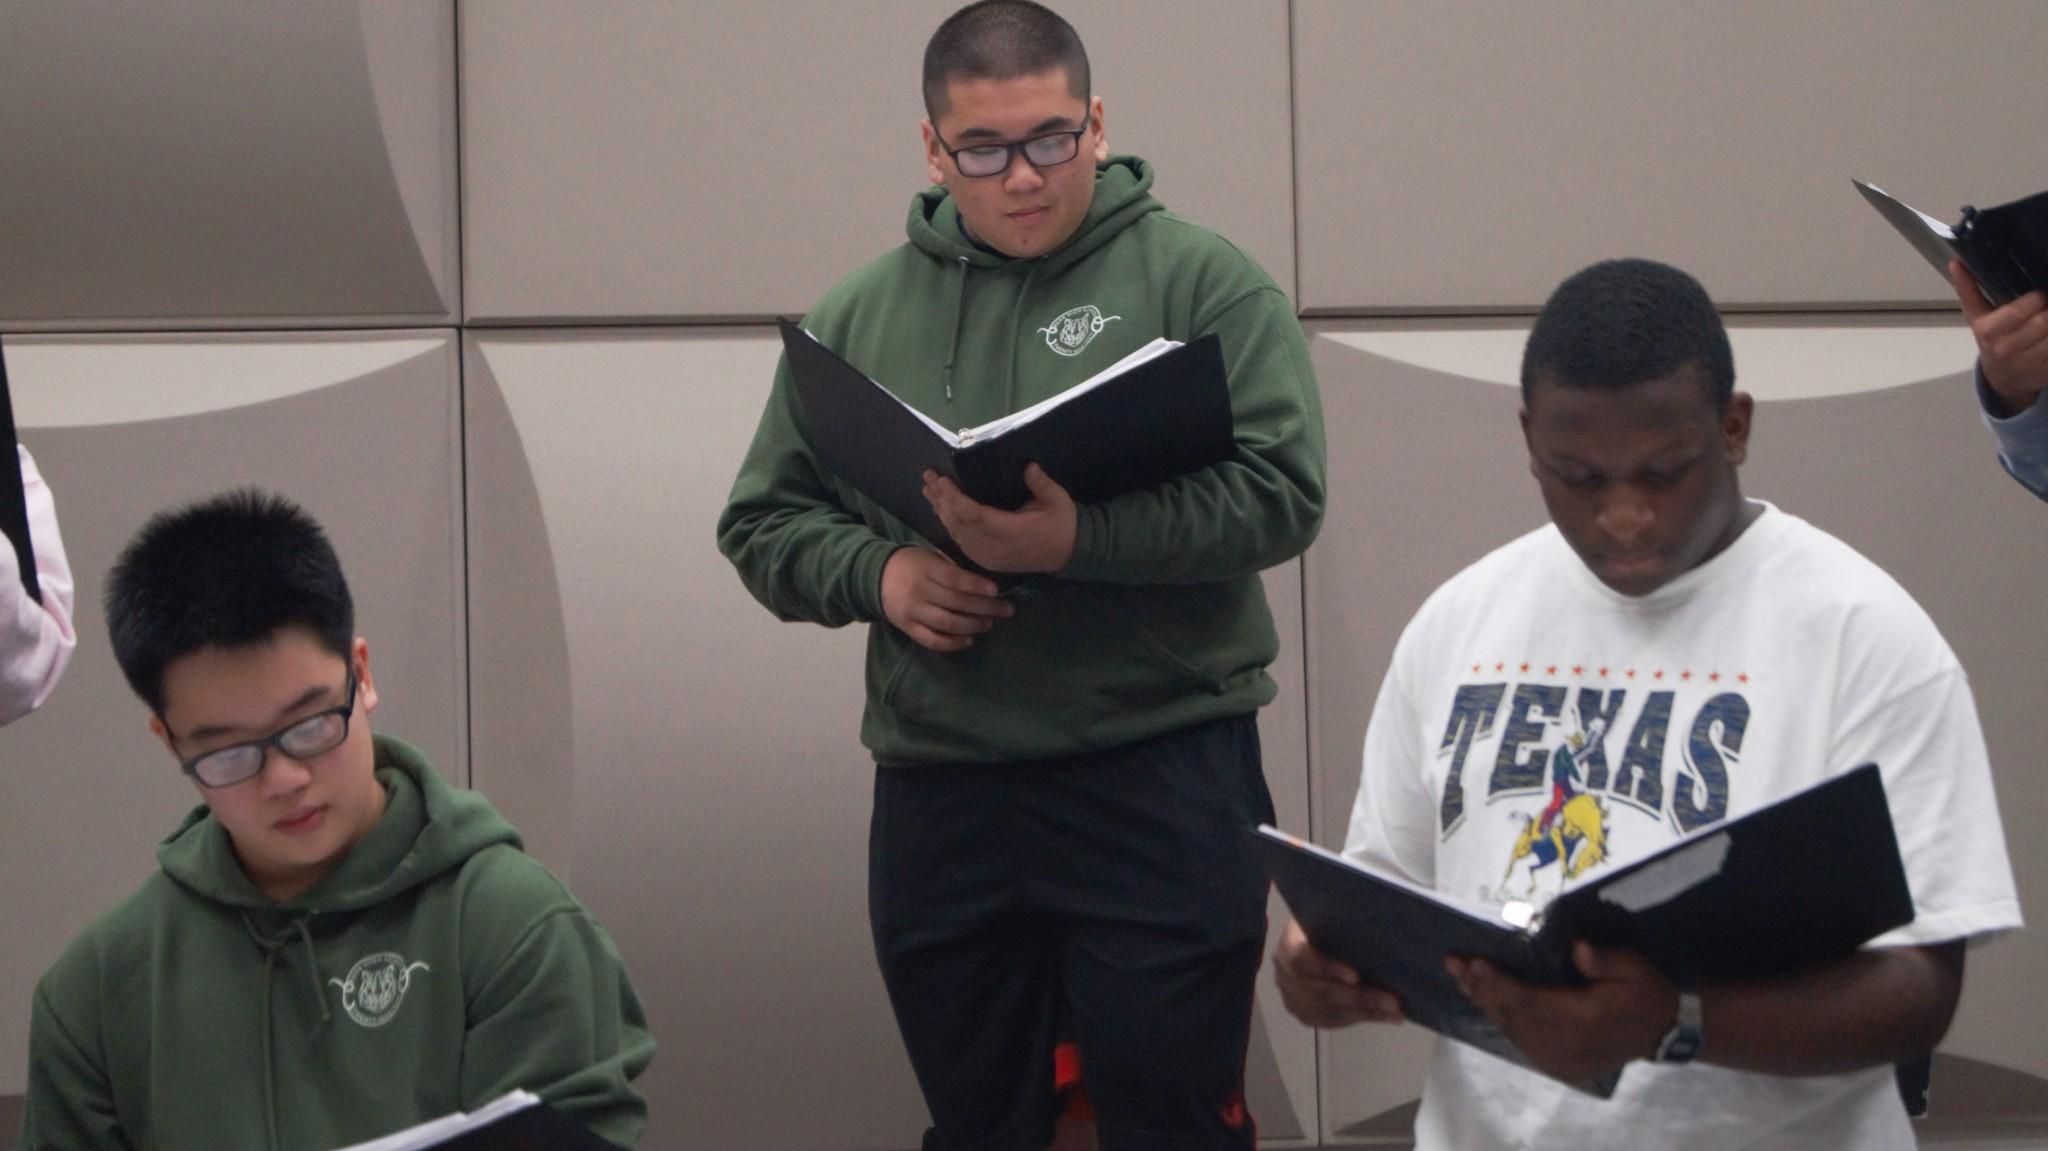 They all are practicing for the upcoming UIL, looking over song lyrics and making sure their pitch is just right.